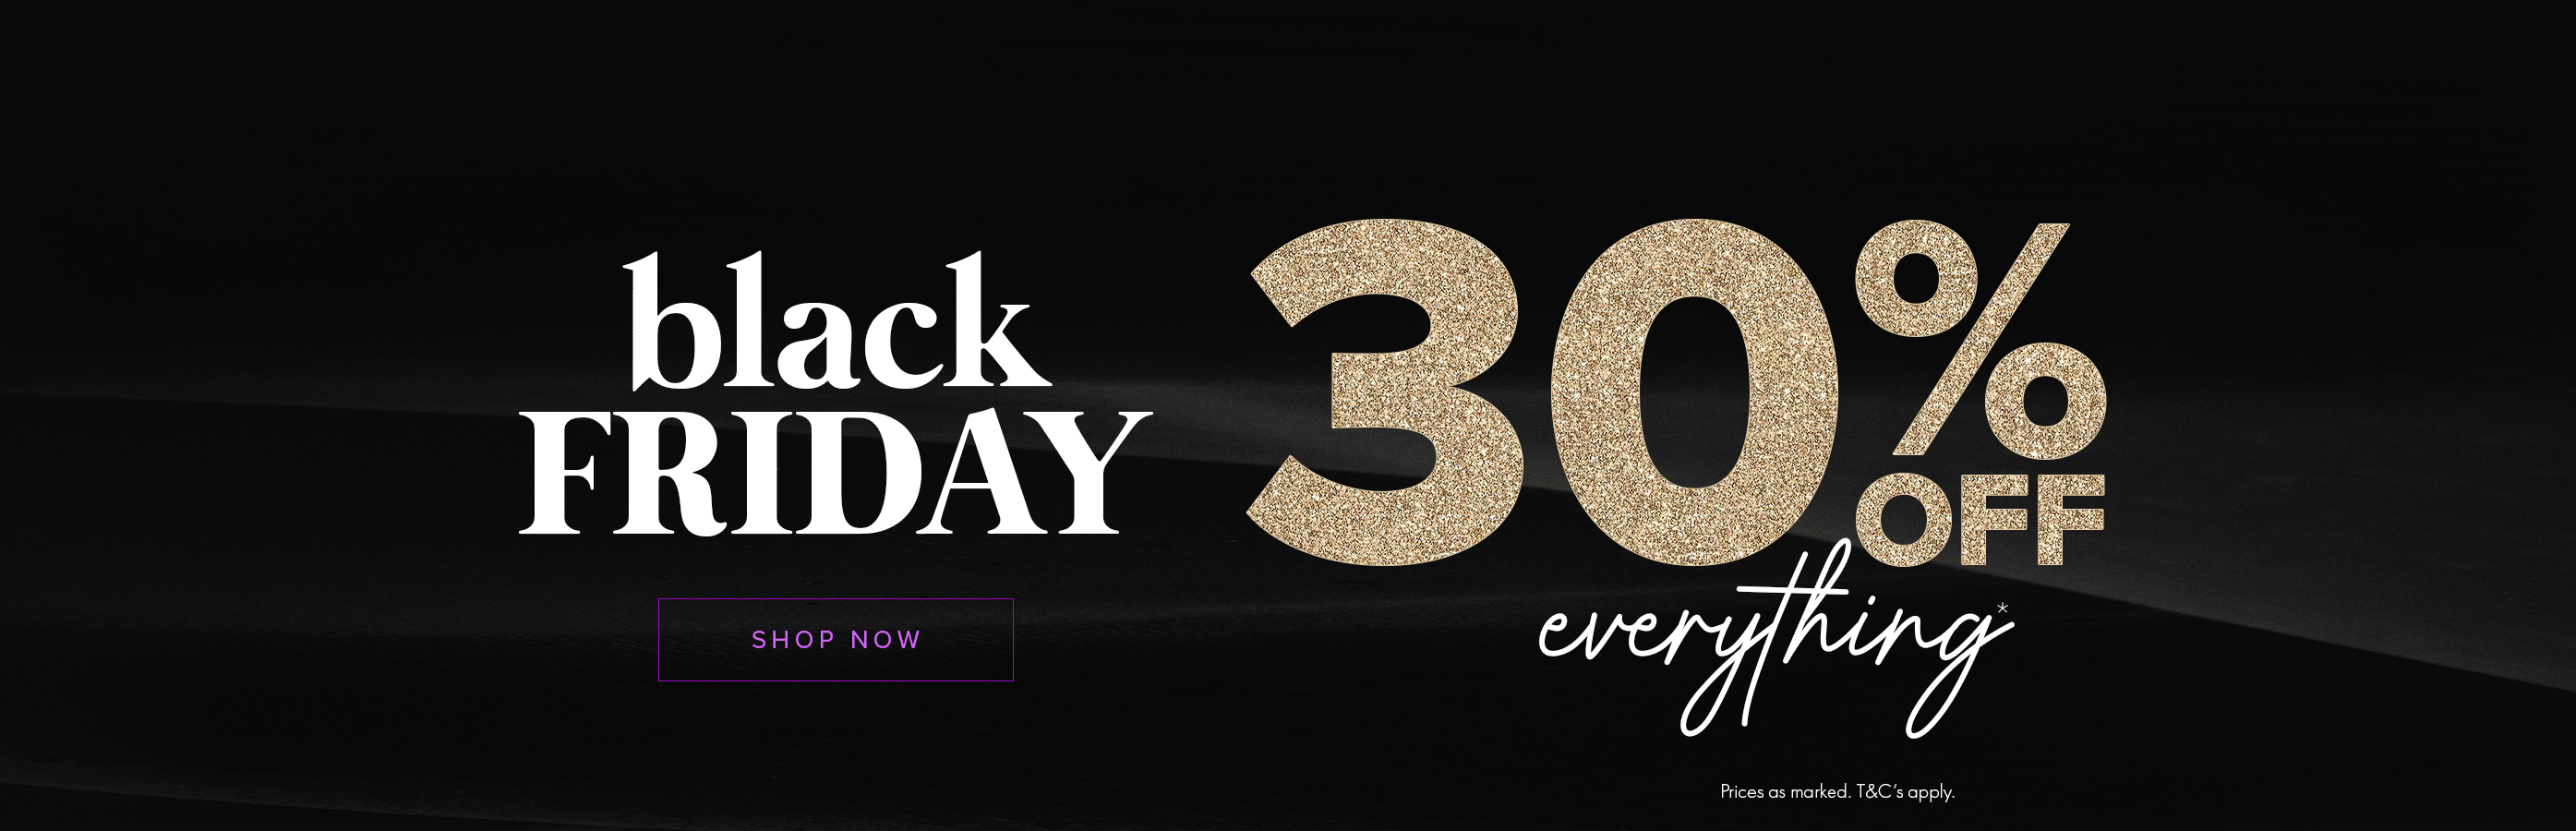 Ally Fashion Black Friday sale 30% OFF everything including selected dresses, tops, skirts